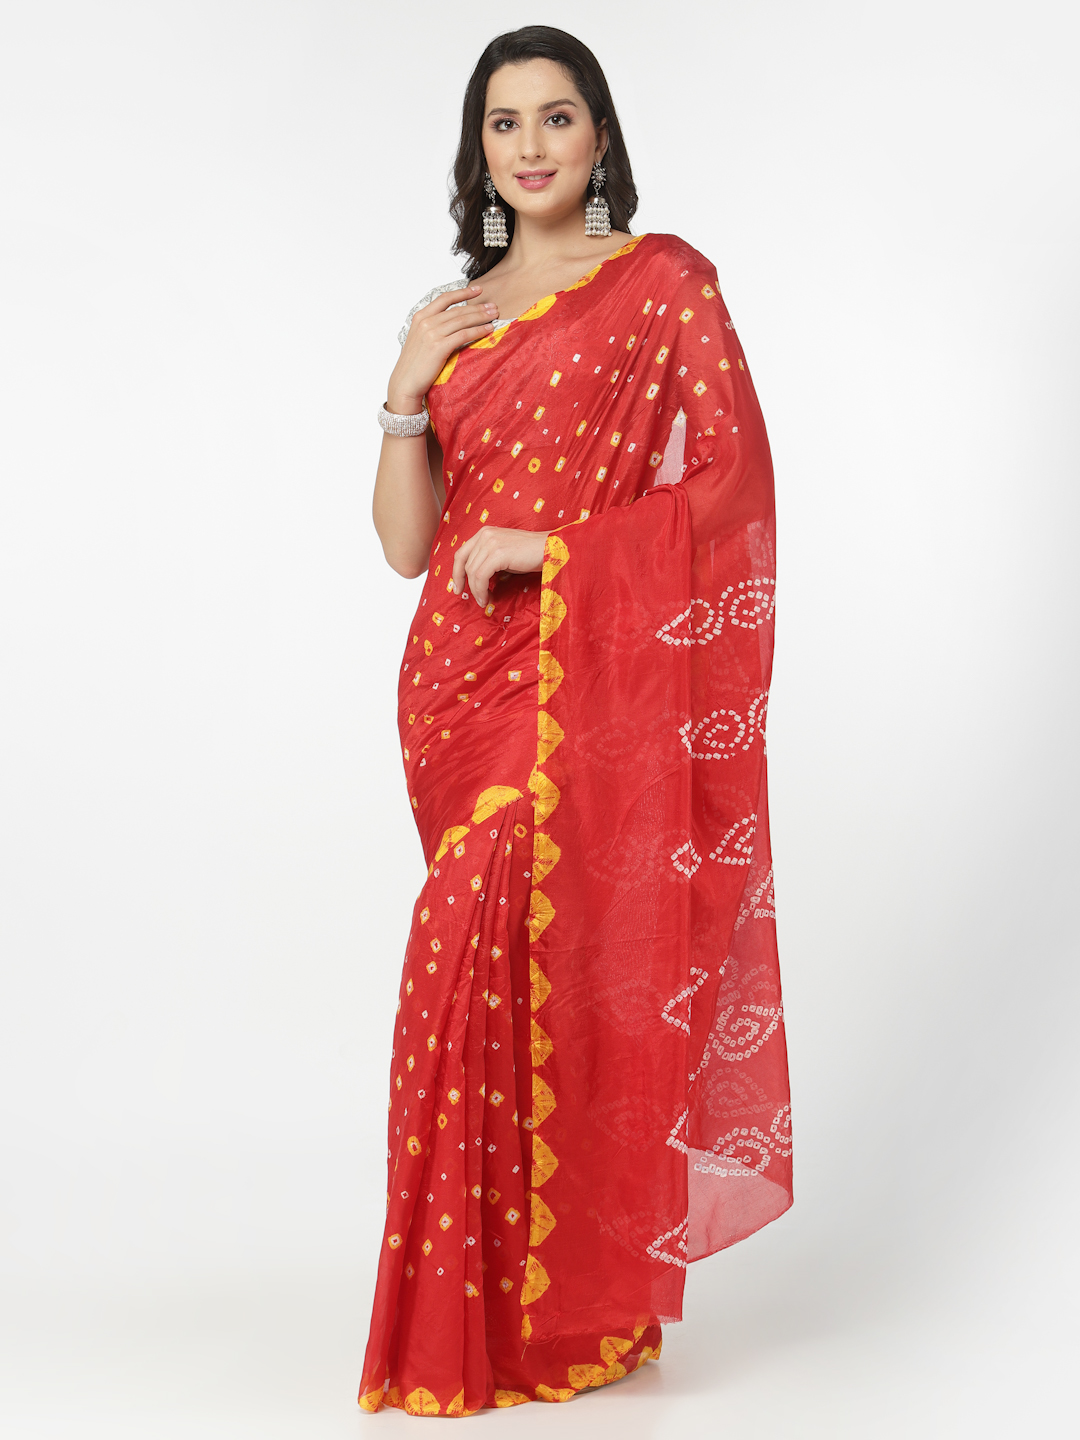 Women Silk Bandhani and Zari Weaving Saree with Unstitched Blouse - Red